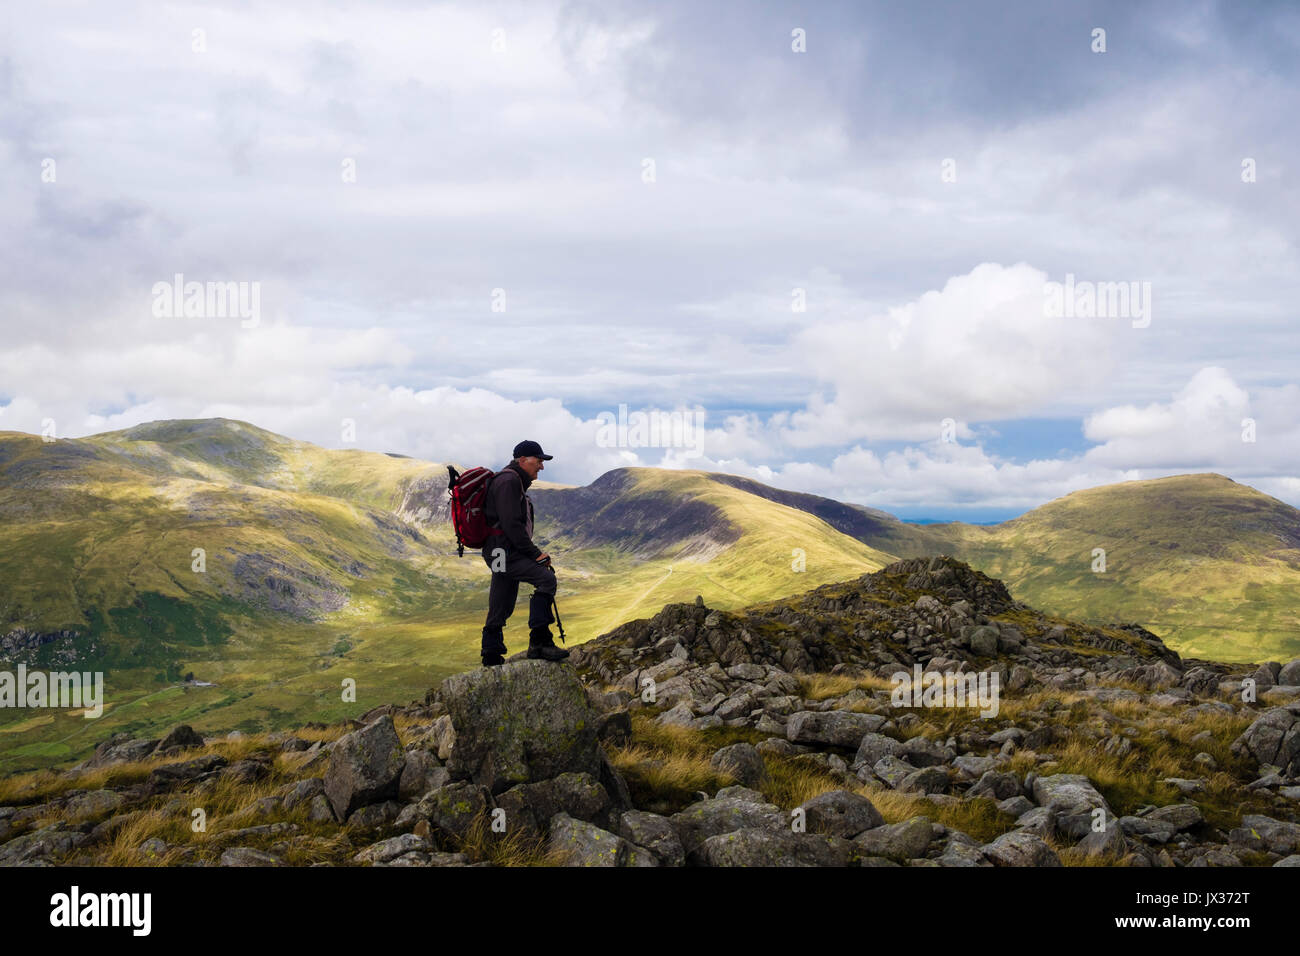 Male hiker on Gallt yr Ogof rocky mountain top in Snowdonia National Park with Carneddau mountains on skyline beyond Ogwen Valley. Conwy Wales UK Stock Photo